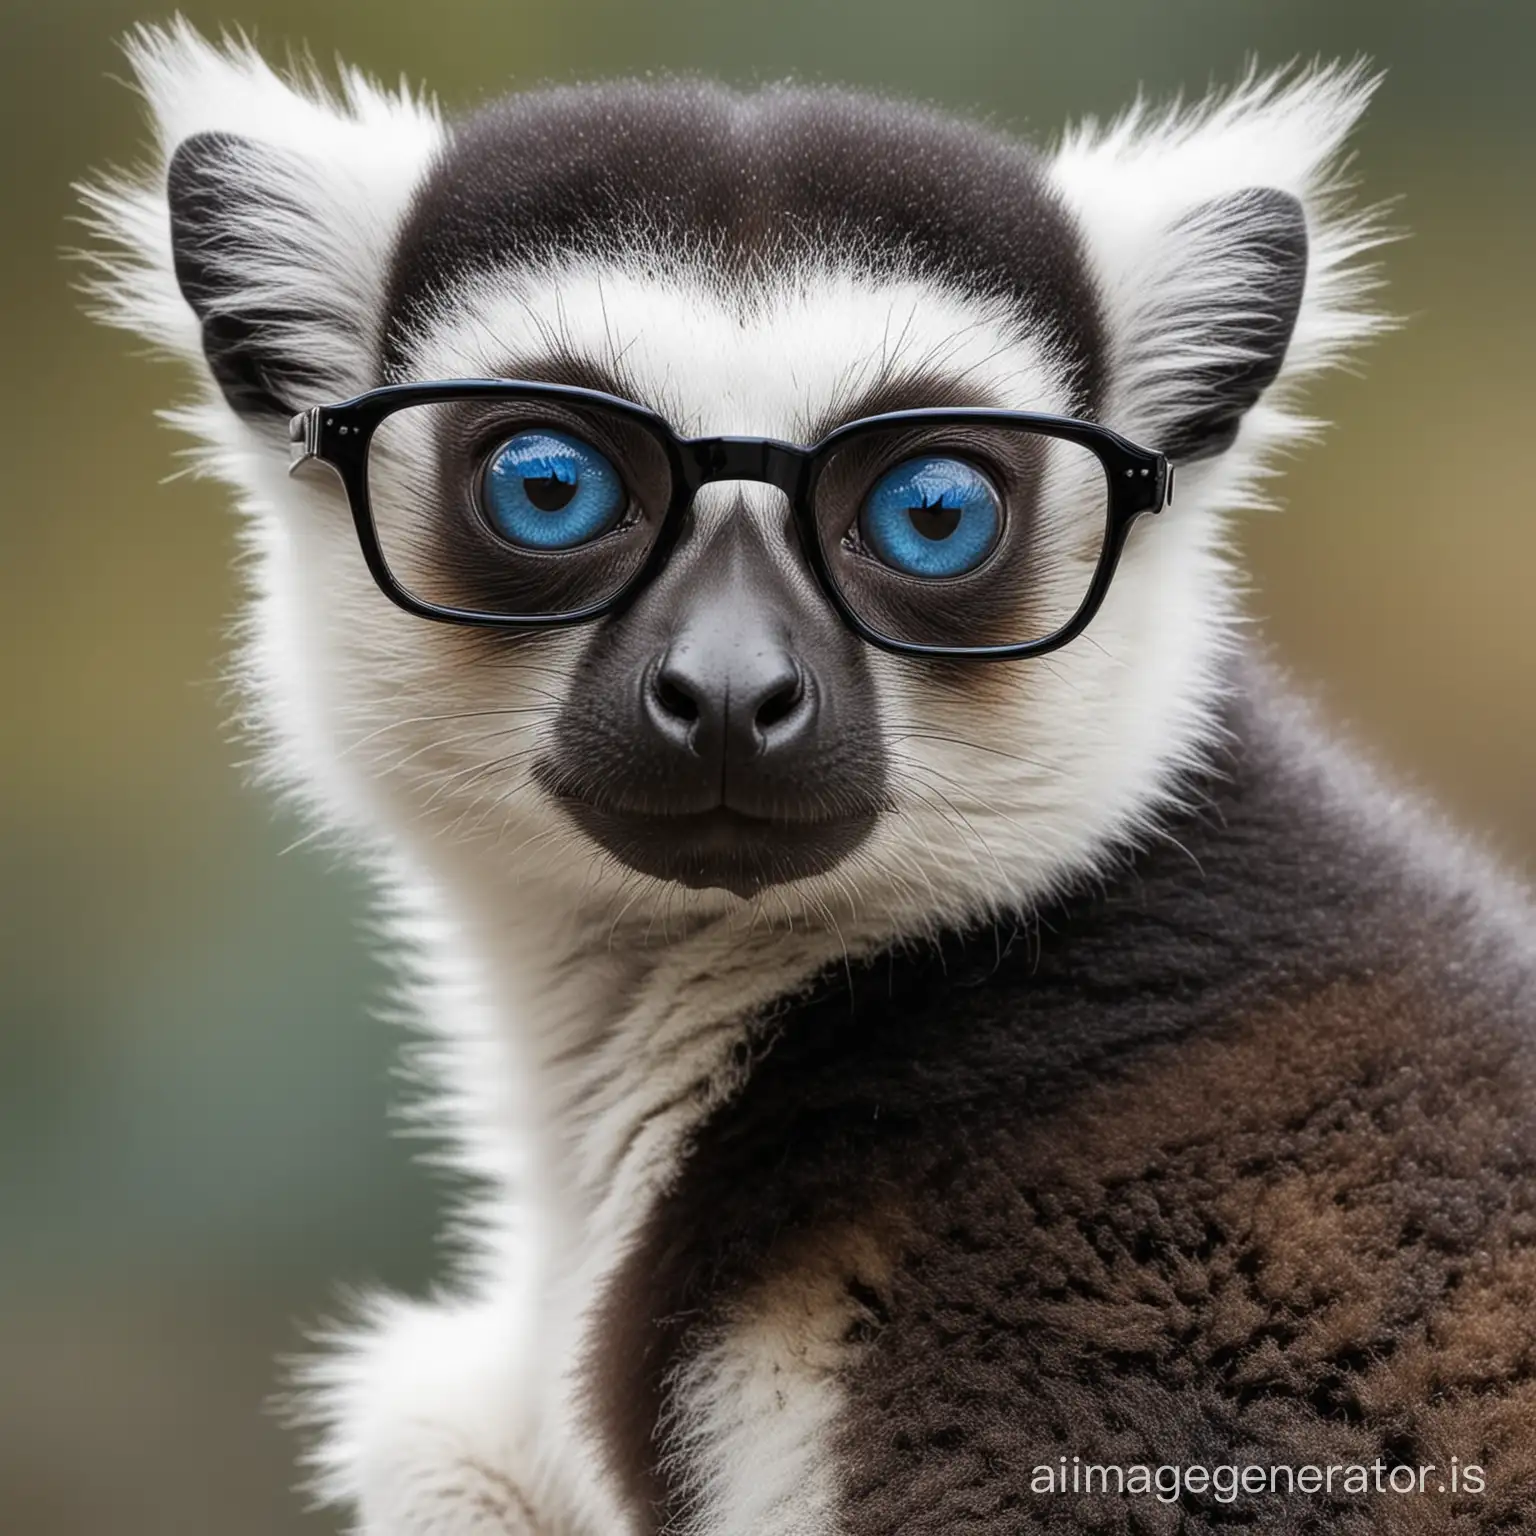 Adorable-Lemur-with-Blue-Eyes-and-Glasses